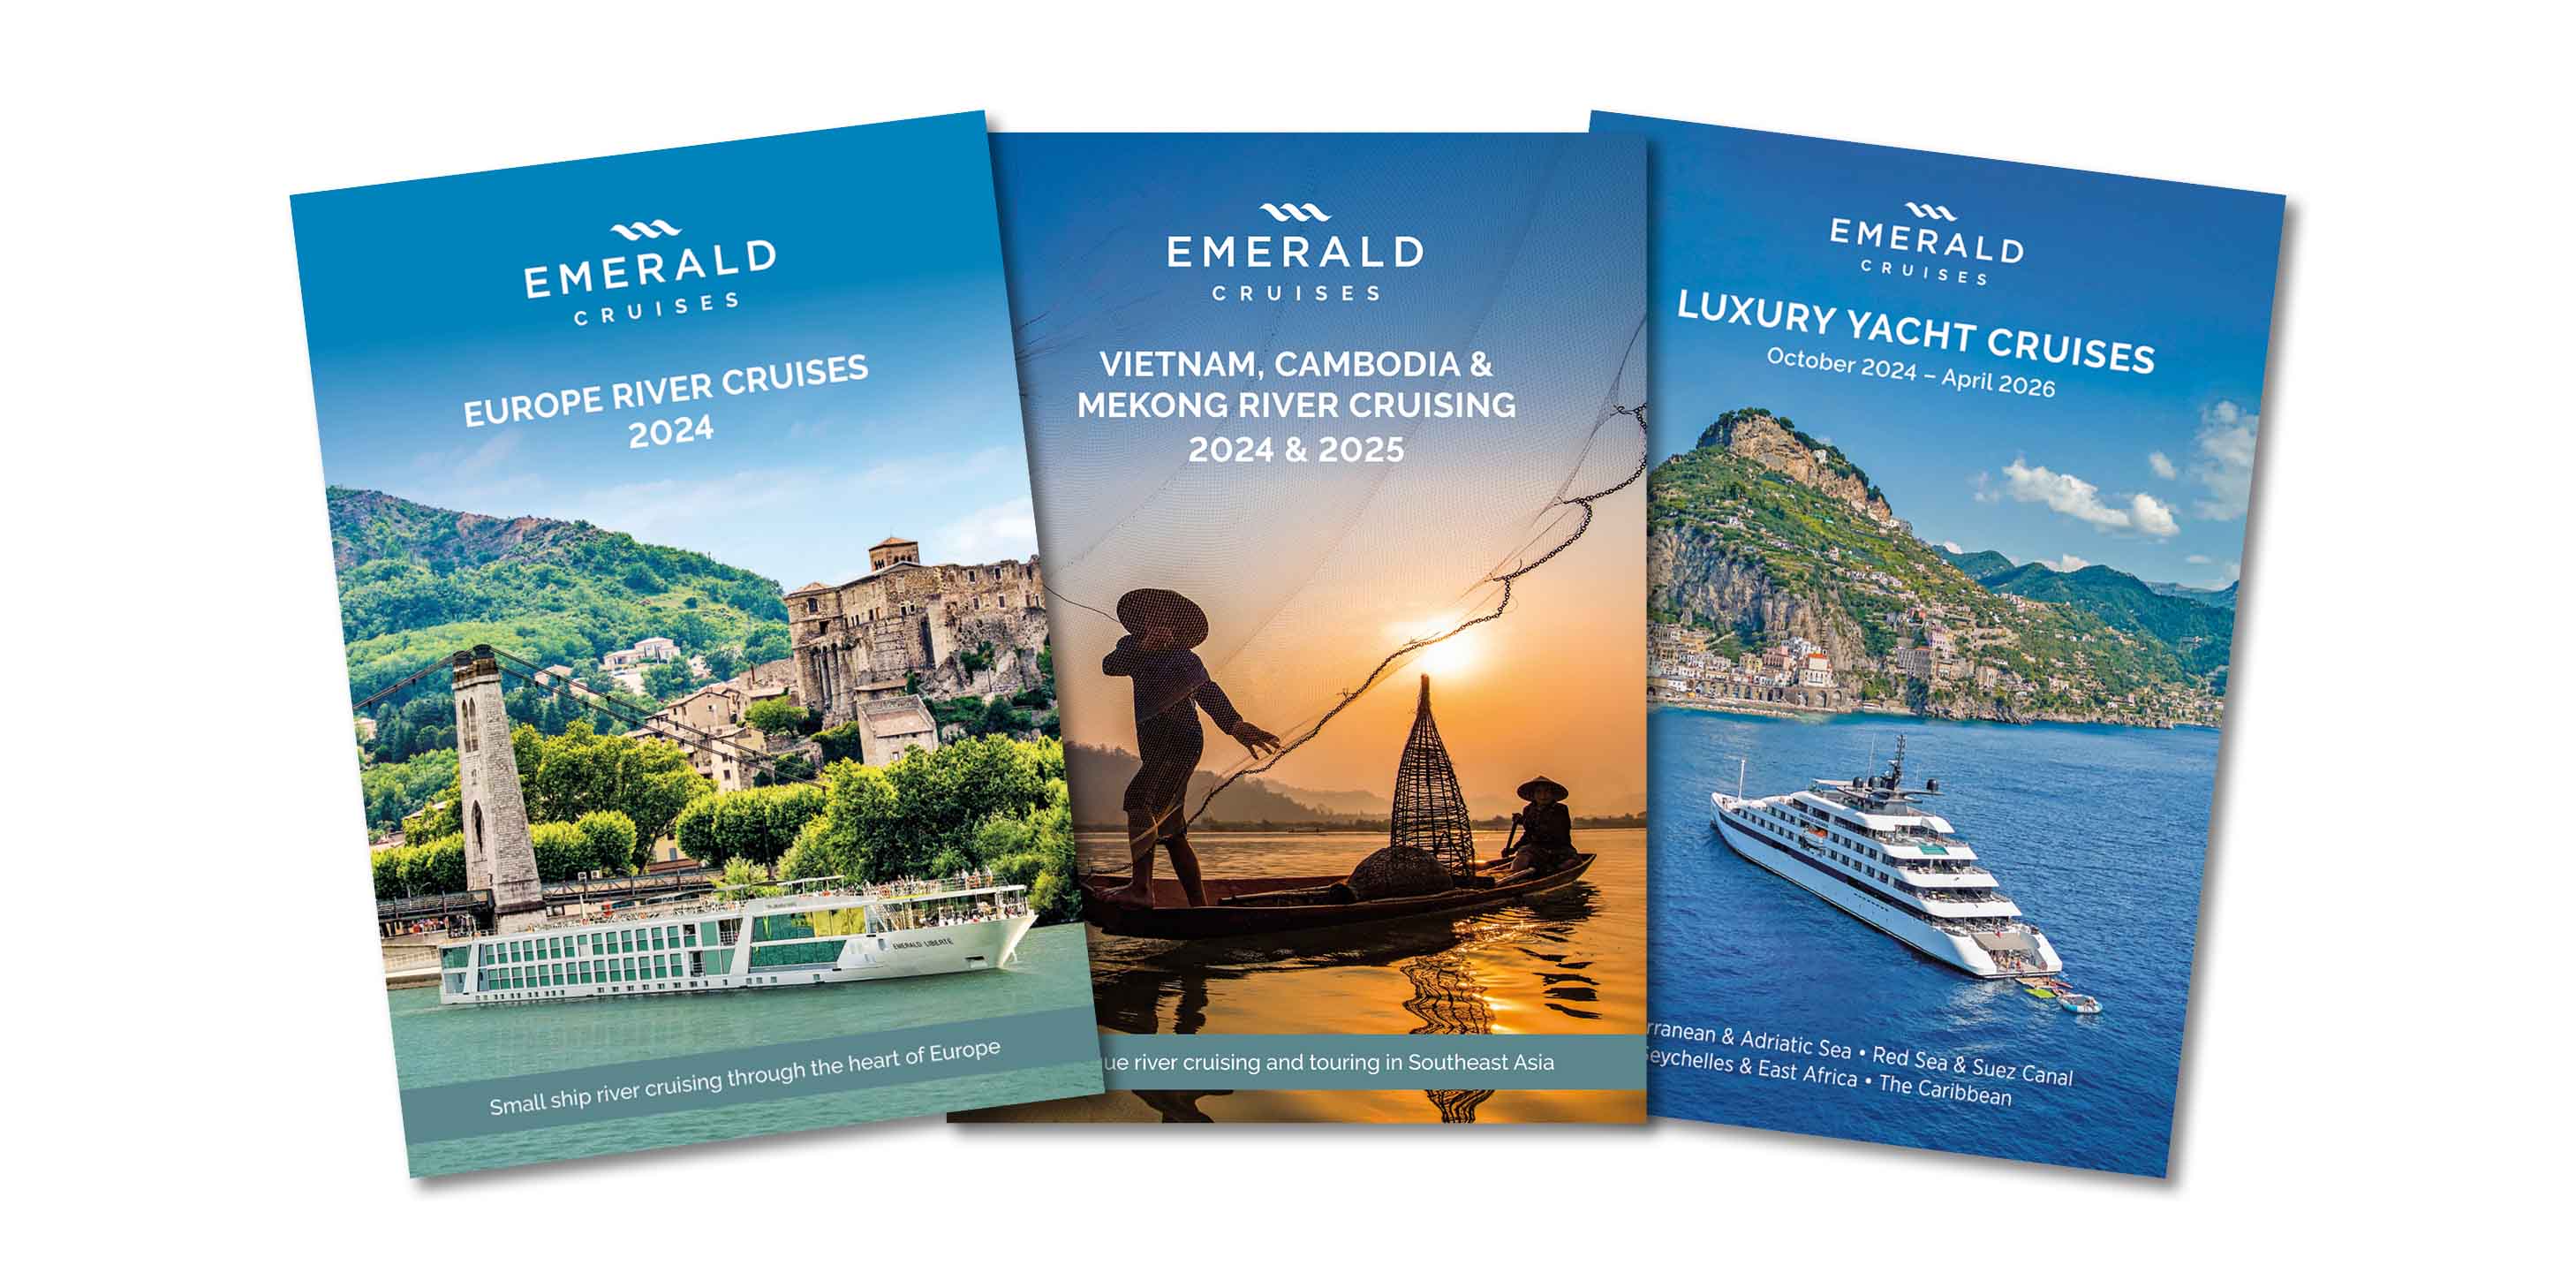 3 brochures spread out next to each other, one for Europe river cruising 2024, one for Southeast Asia river cruising 2024 & 2025, and one for Luxury Yacht Cruises 2023 & 2024